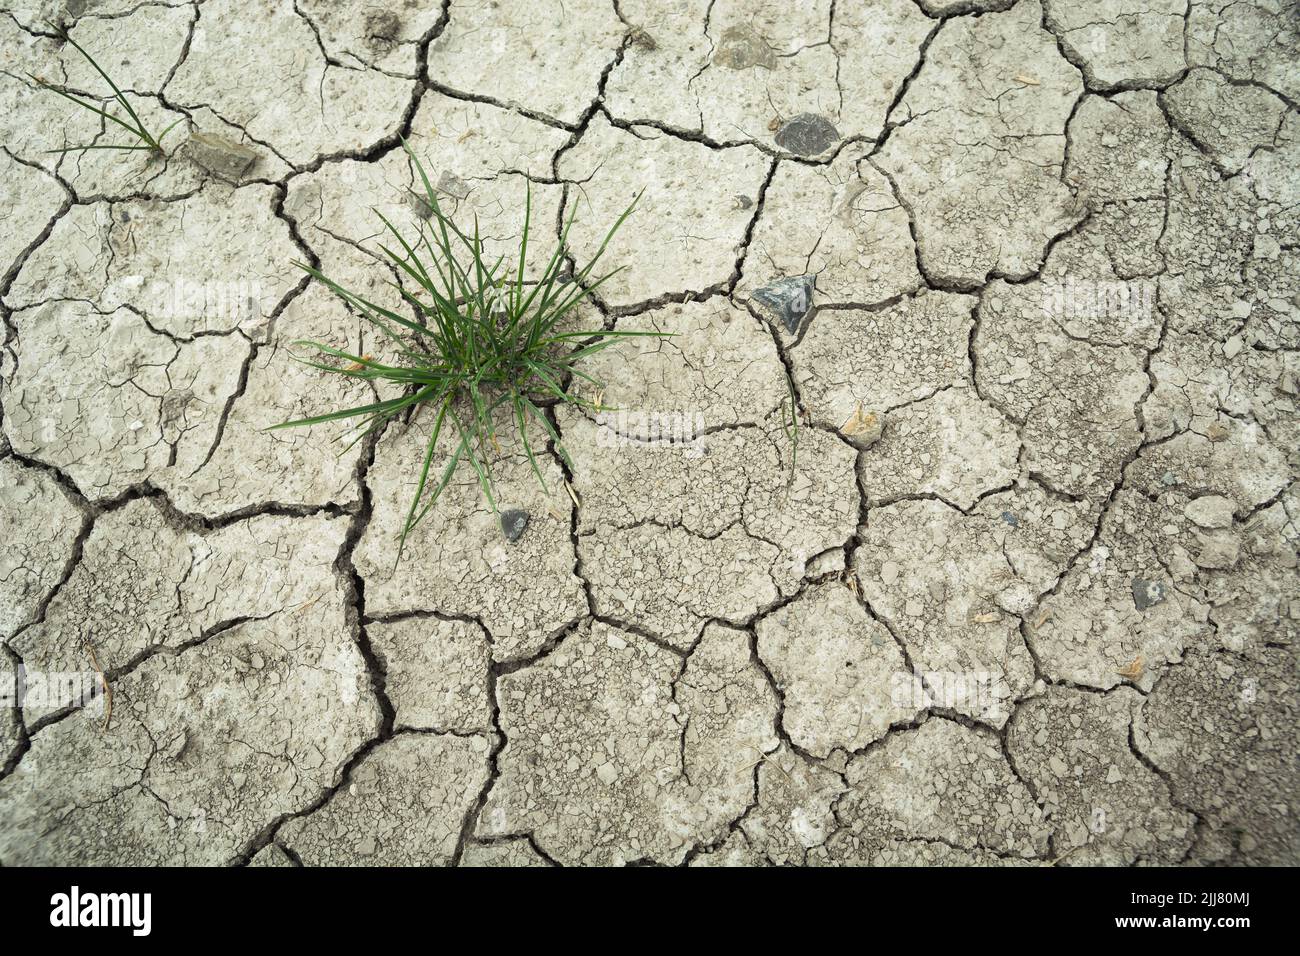 Clump of grass growing in dry and cracked soil, summer view Stock Photo